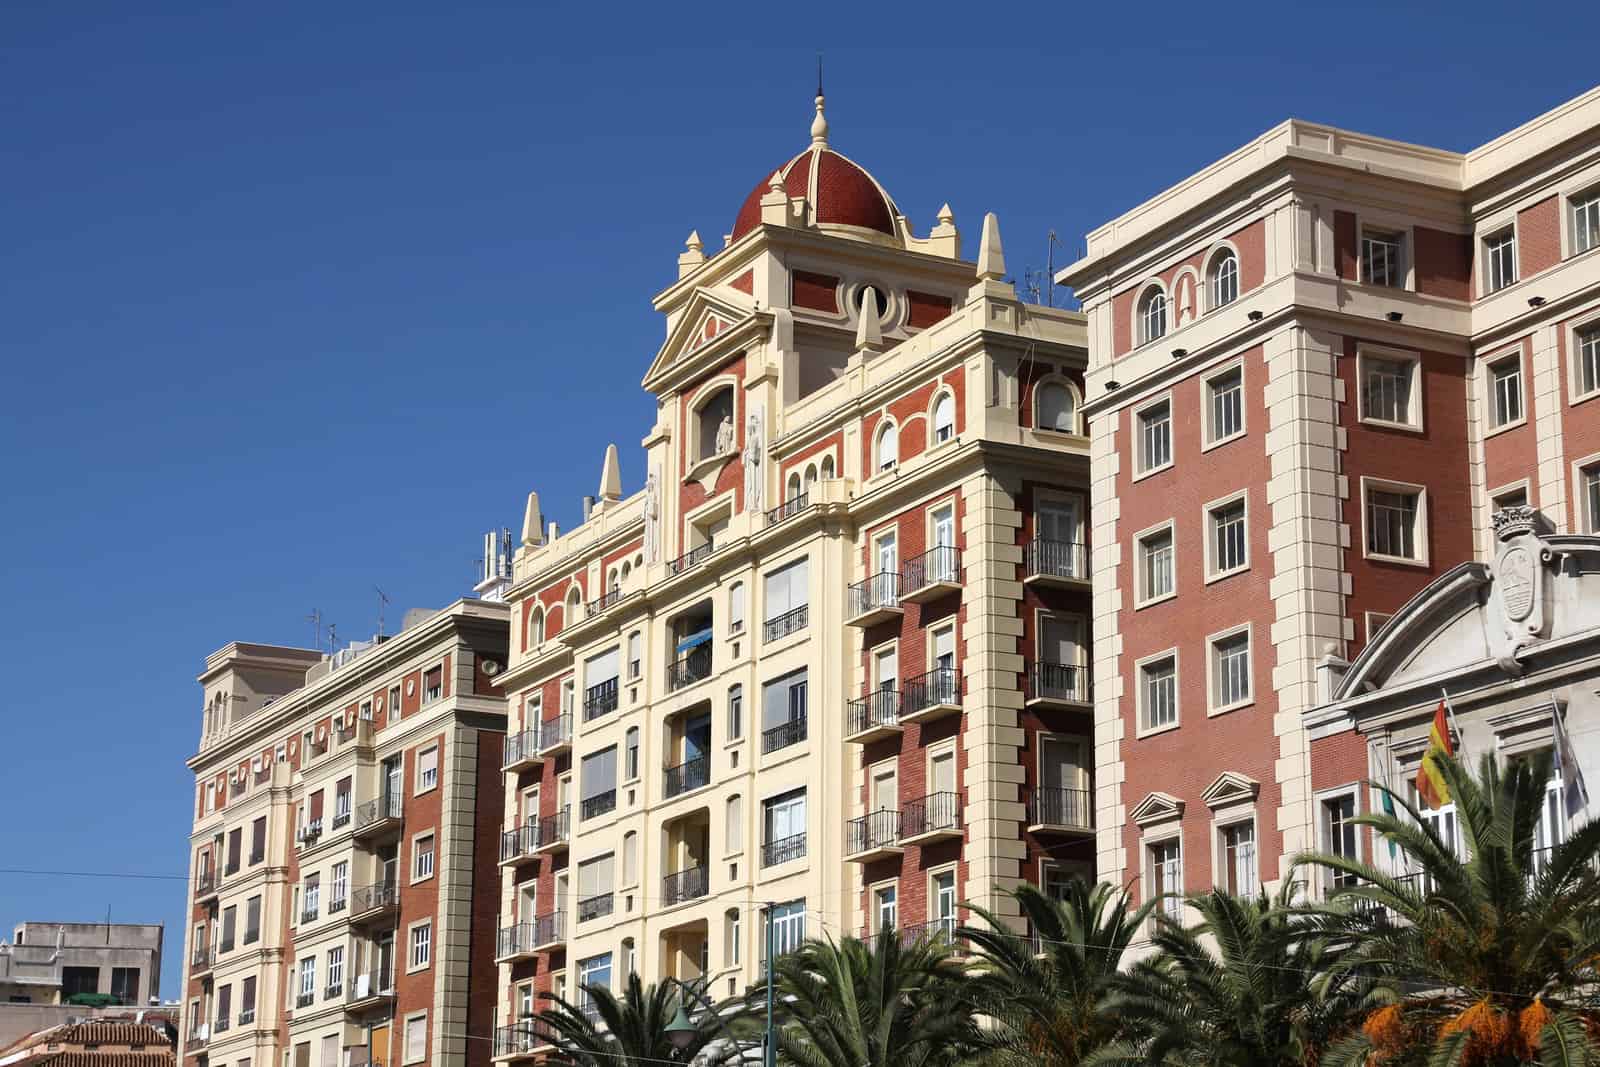 Hotel Malaga in Andalusia, Spain. Old style architecture.